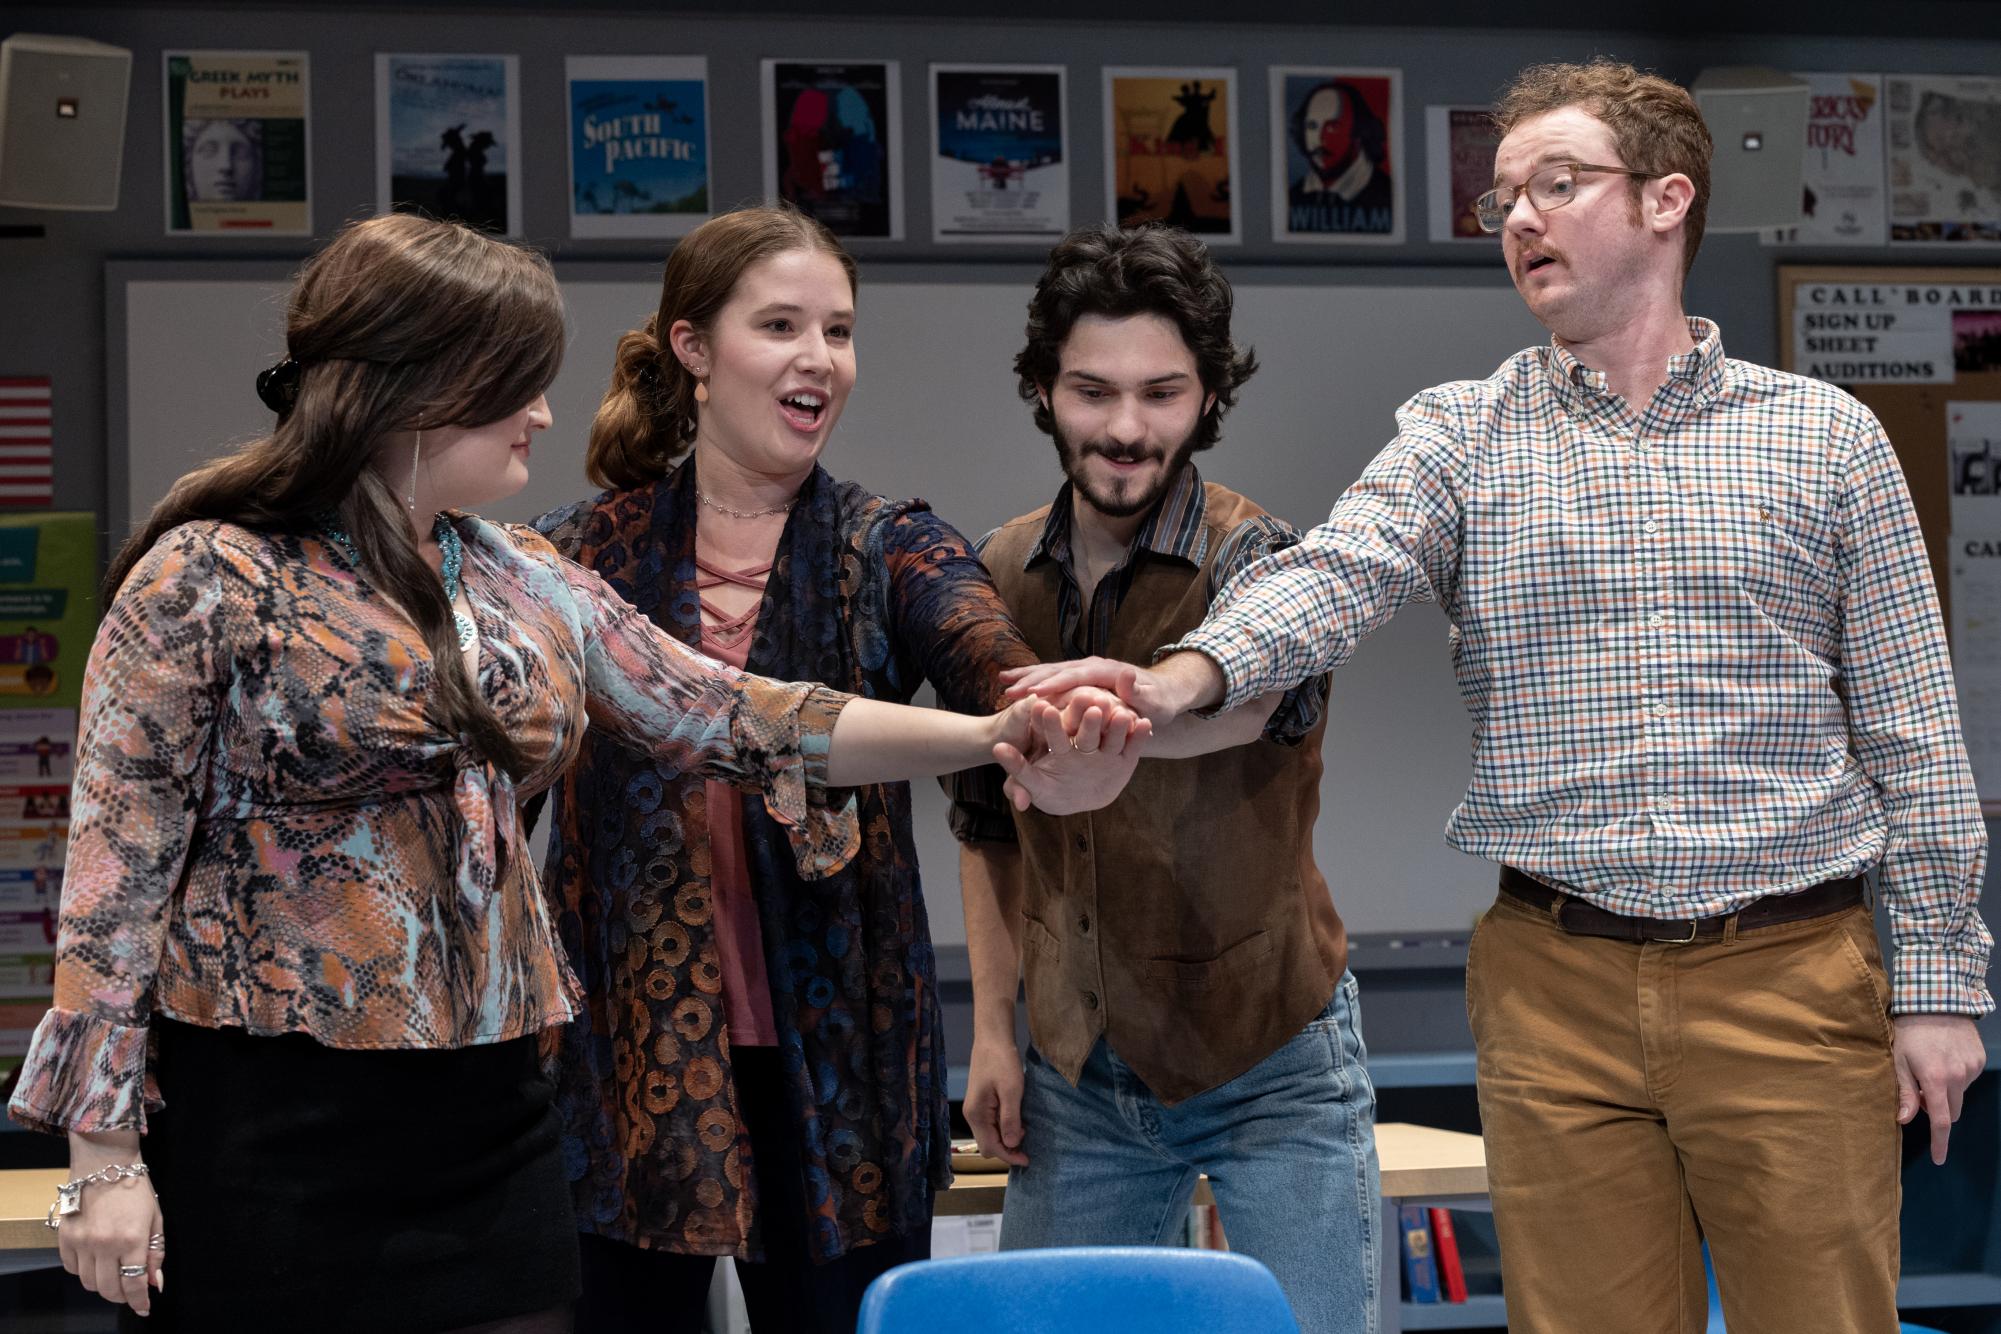 From left to right, Ruby Marden 27, Paige Magid 24, A.J. Matos 26 and David Walker 24 perform in The Thanksgiving Play by Larissa FastHorse, a comedy that satirizes well-meaning progressivism gone wrong. Phyllis Graber Jensen/Bates College.